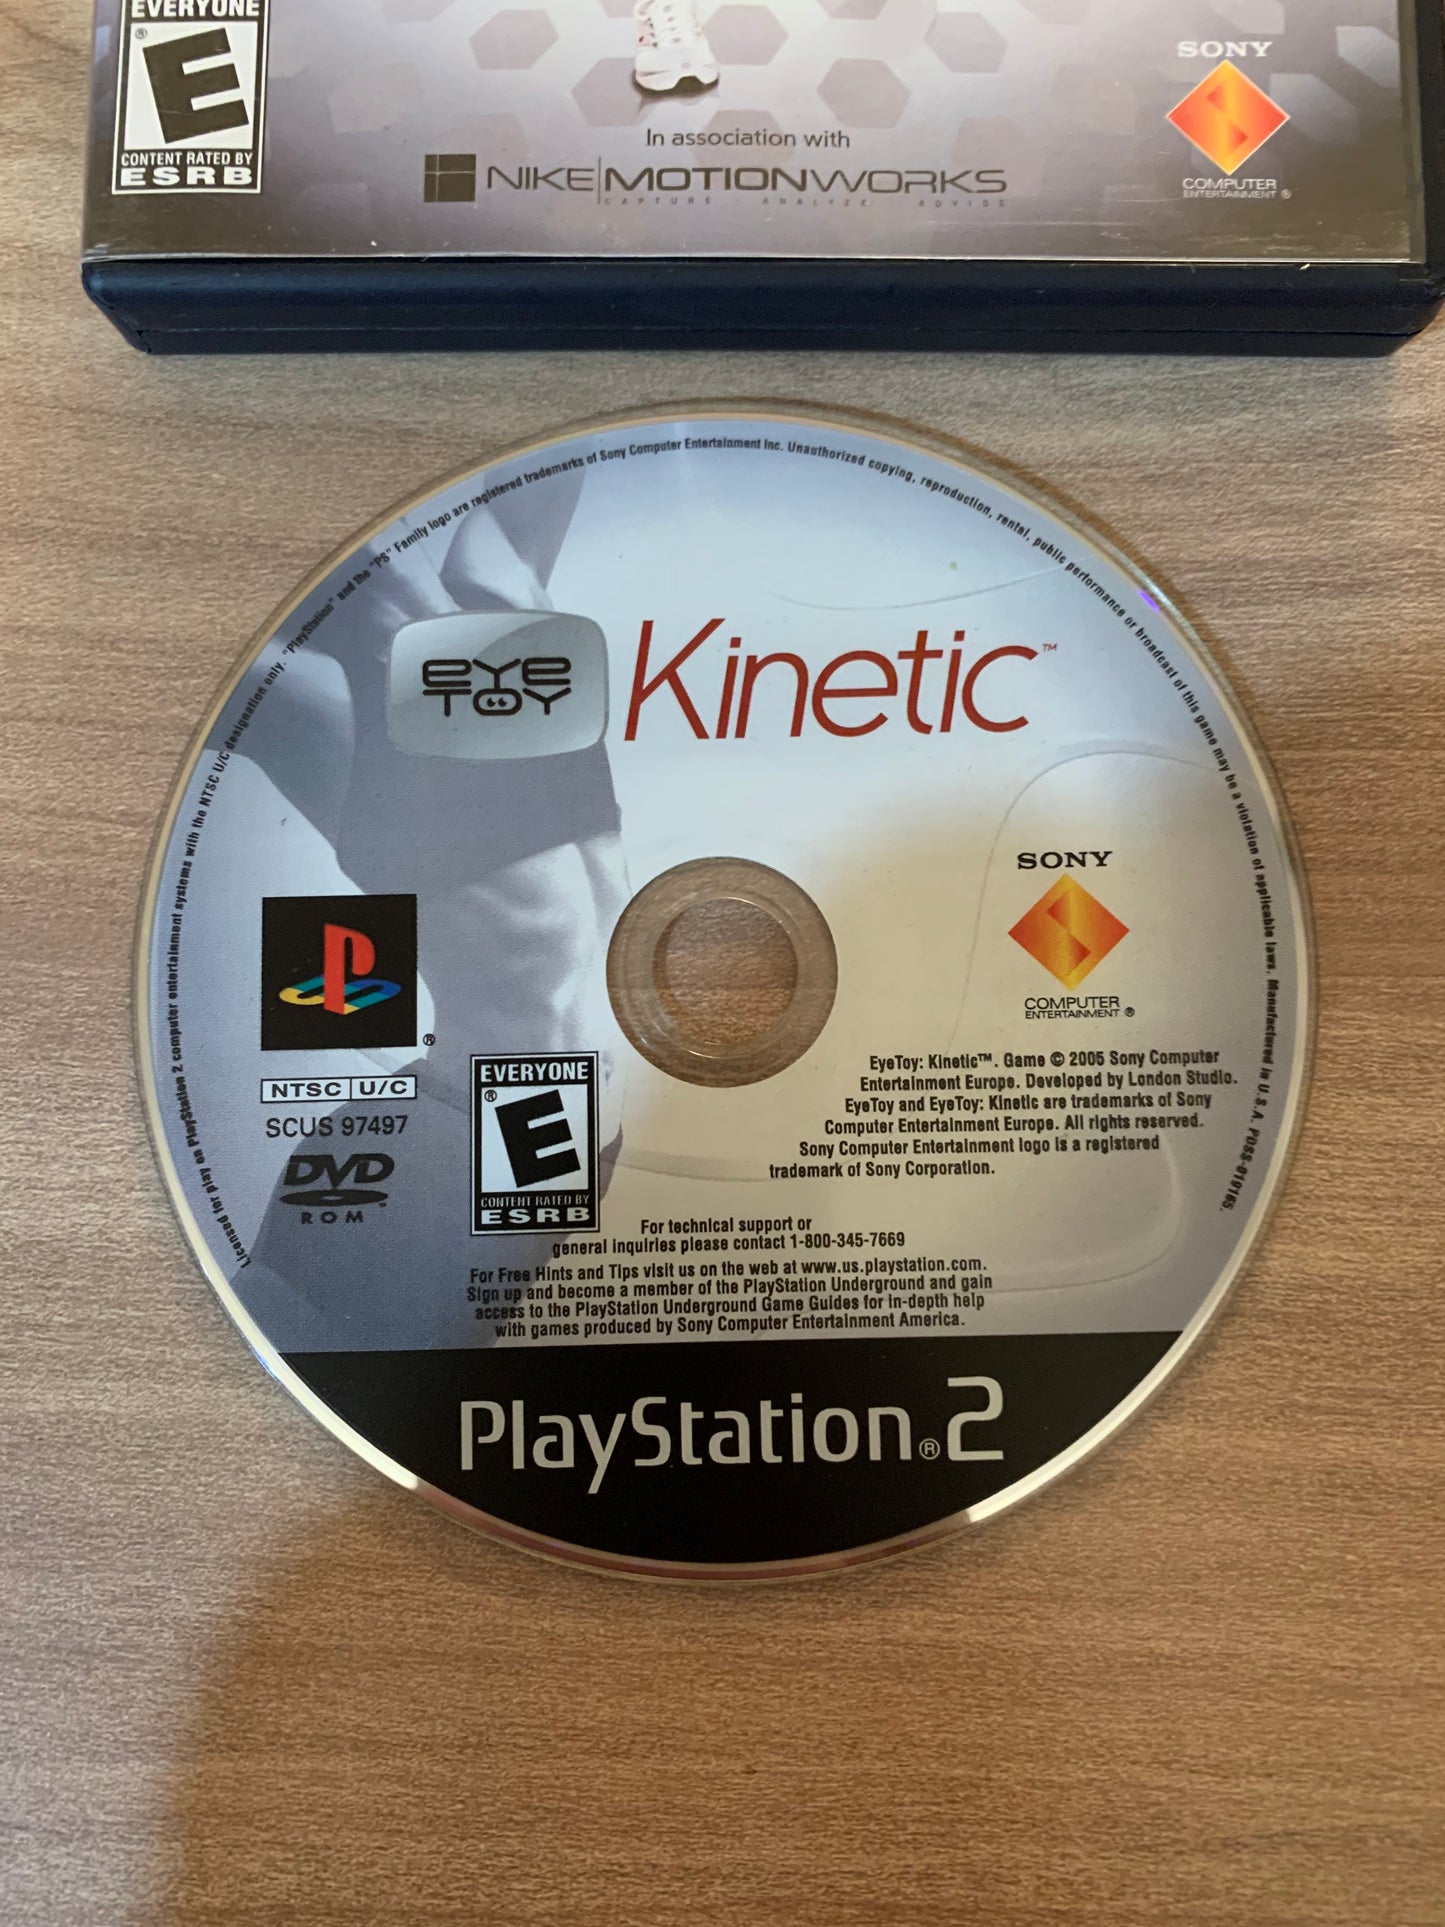 SONY PLAYSTATiON 2 [PS2] | EYE TOY KiNETiC